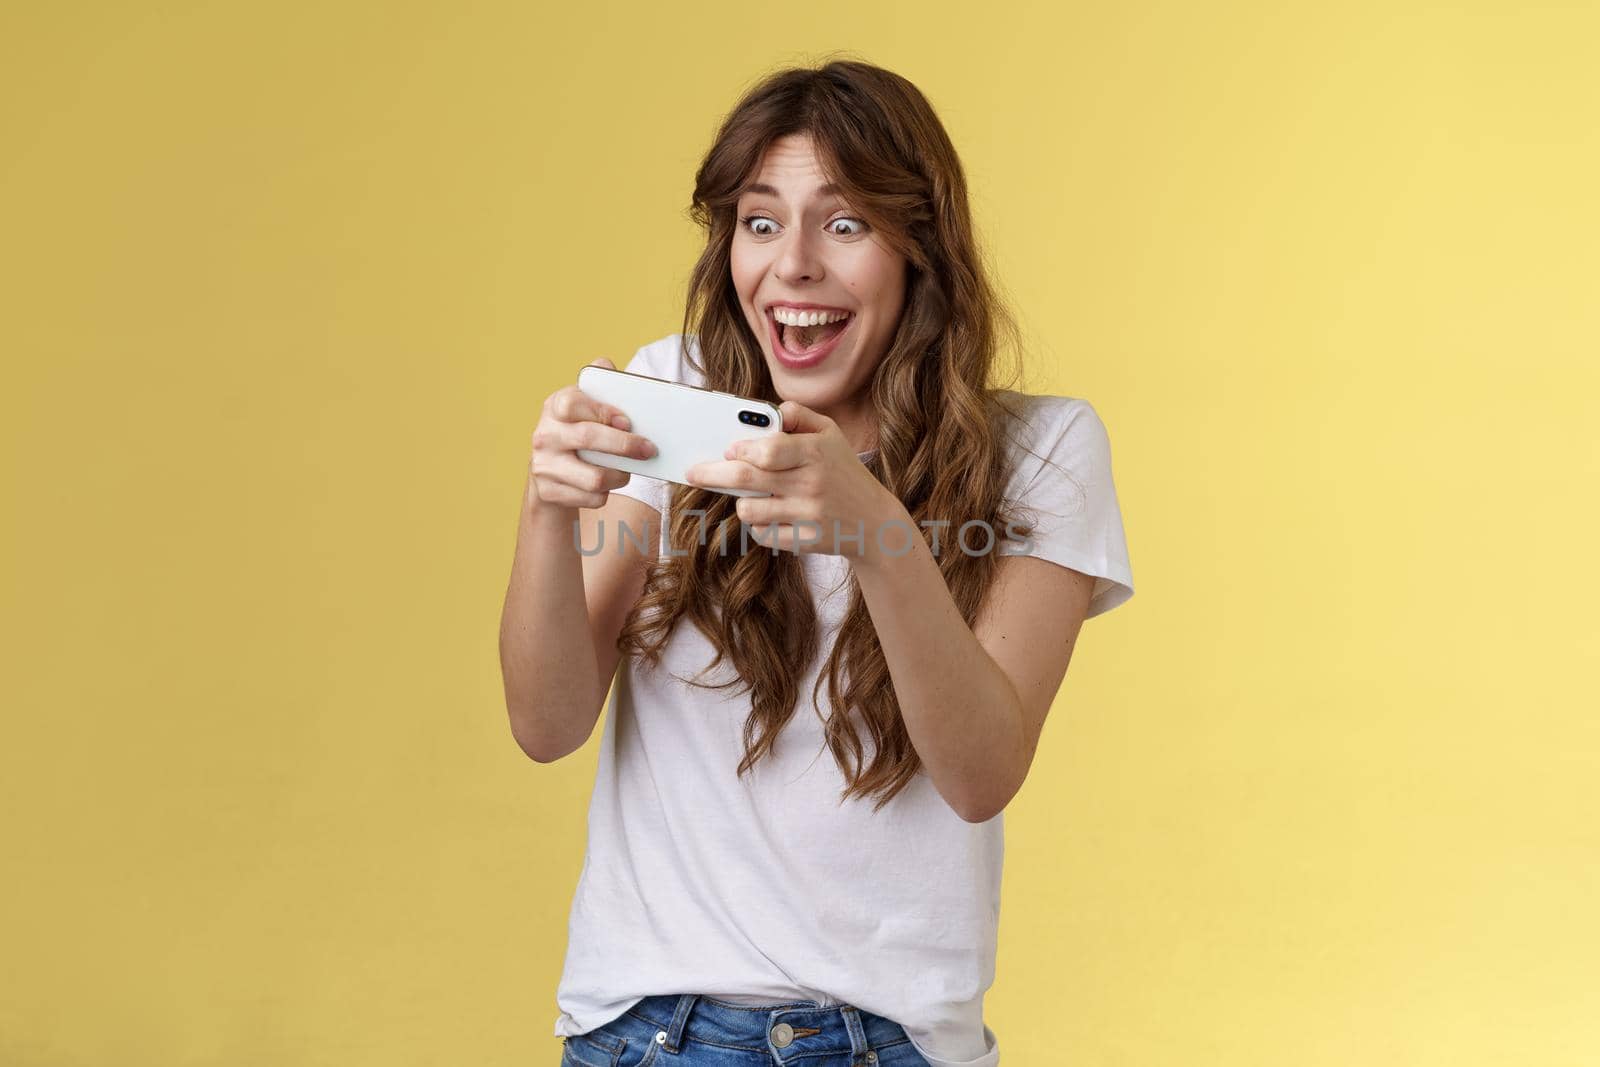 Happy upbeat playful enthusiastic curly-haired girl tempting playing stunning awesome smartphone game hold mobile phone horizontal way smiling broadly stare camera focused winning beat score. Lifestyle.